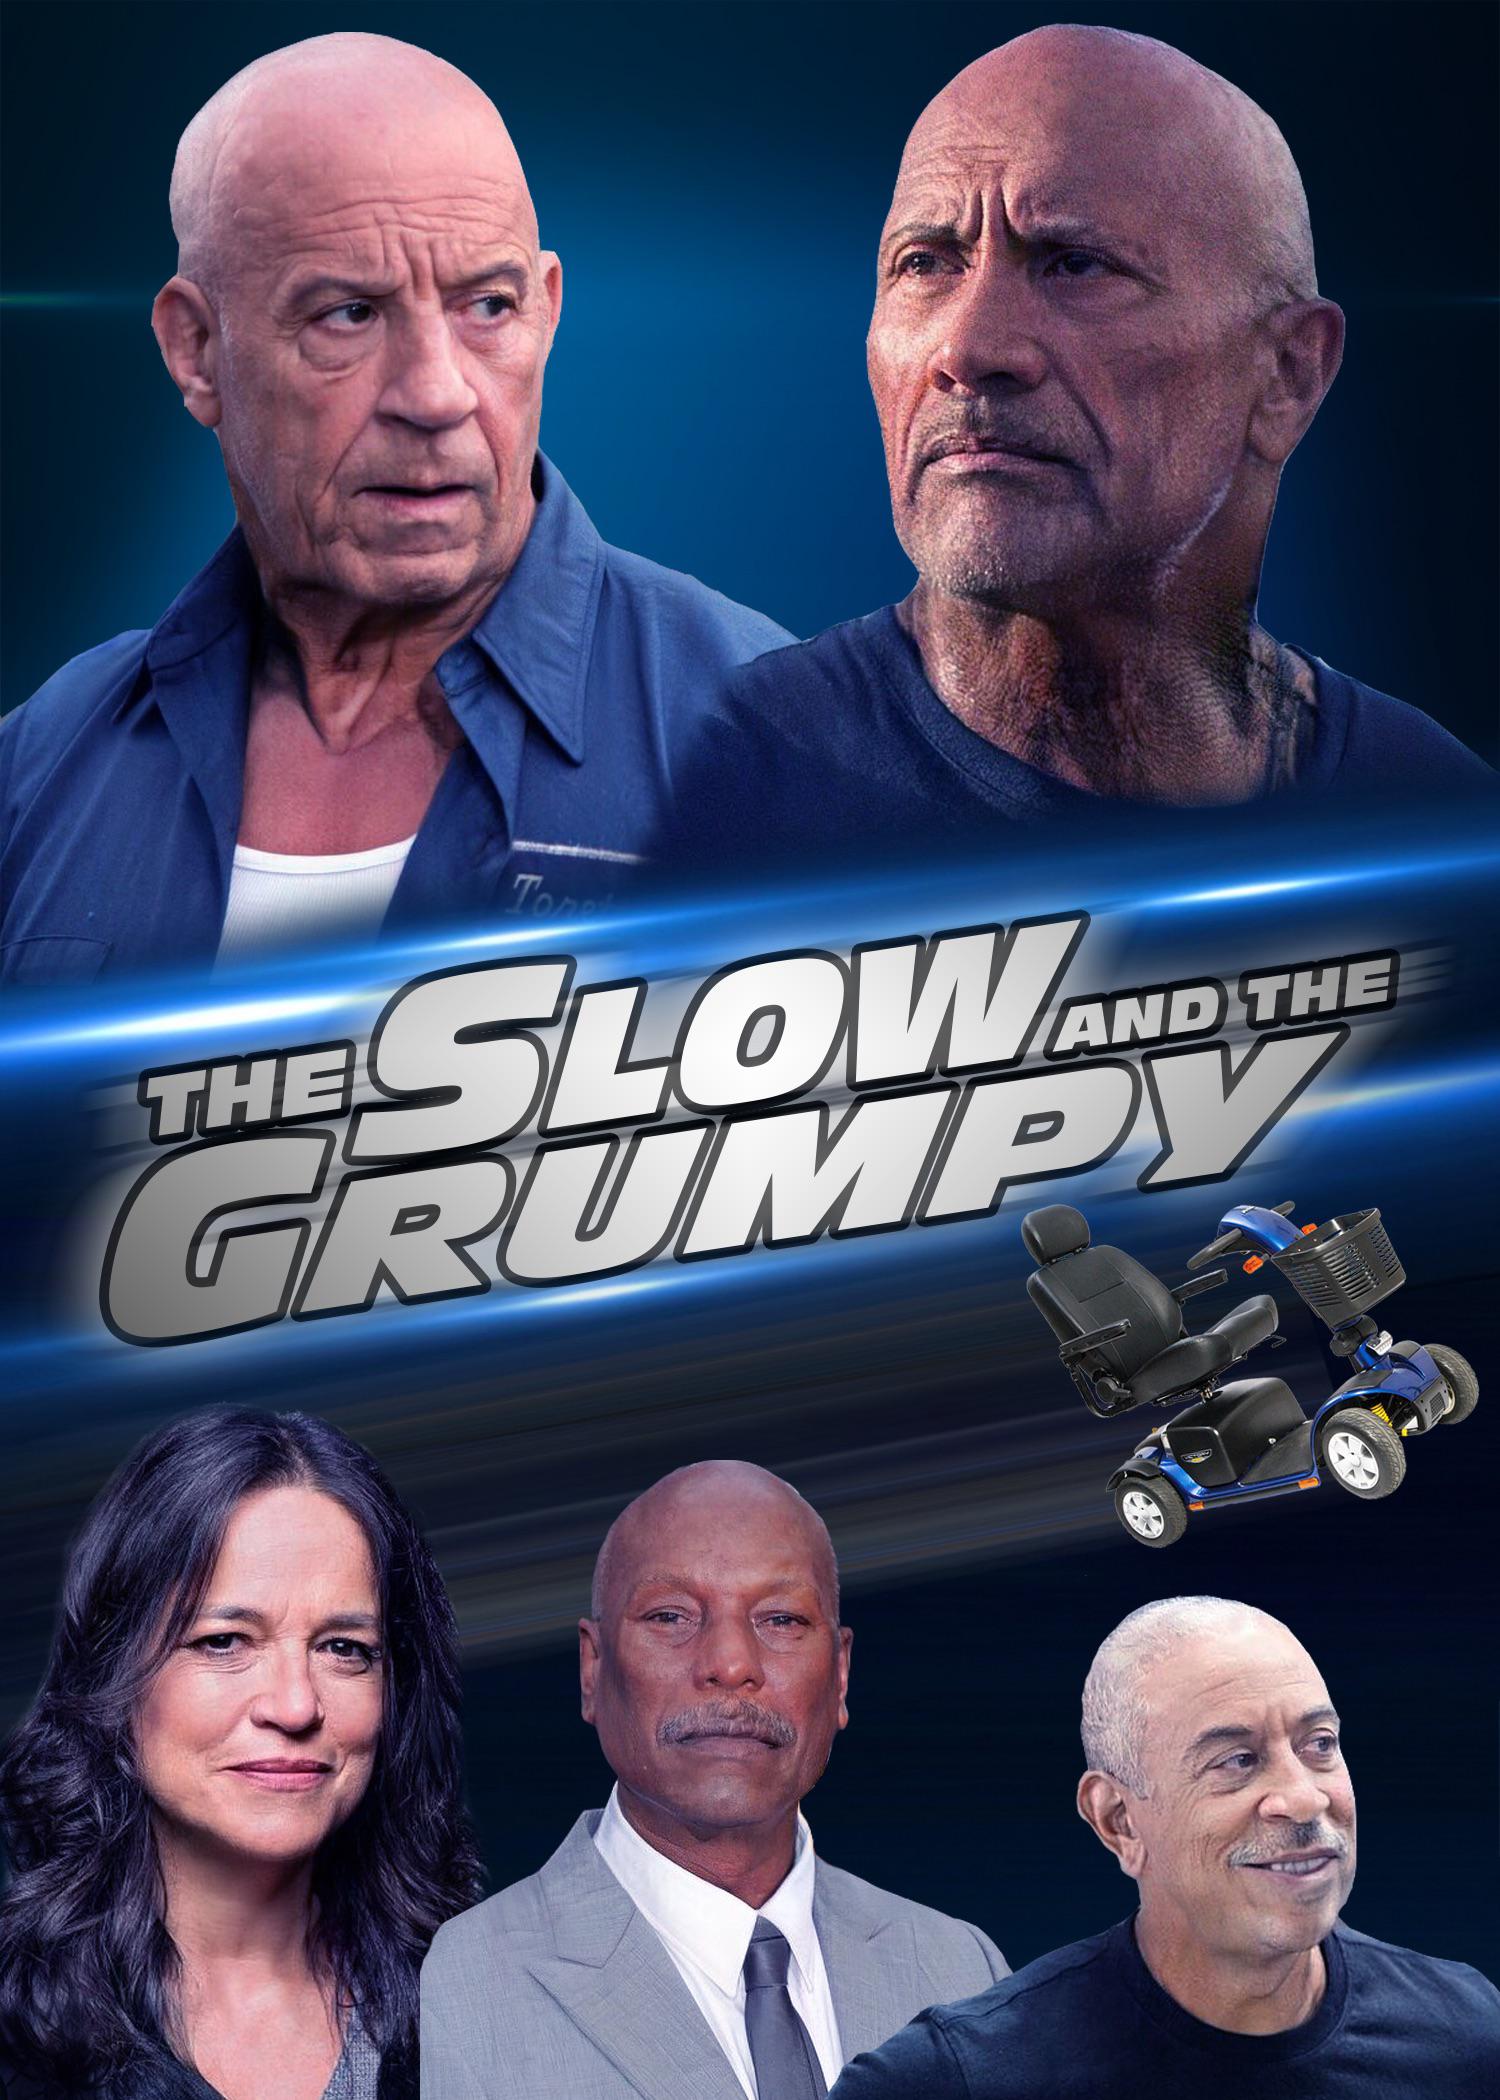 poster - Thes Low And The Grumpy